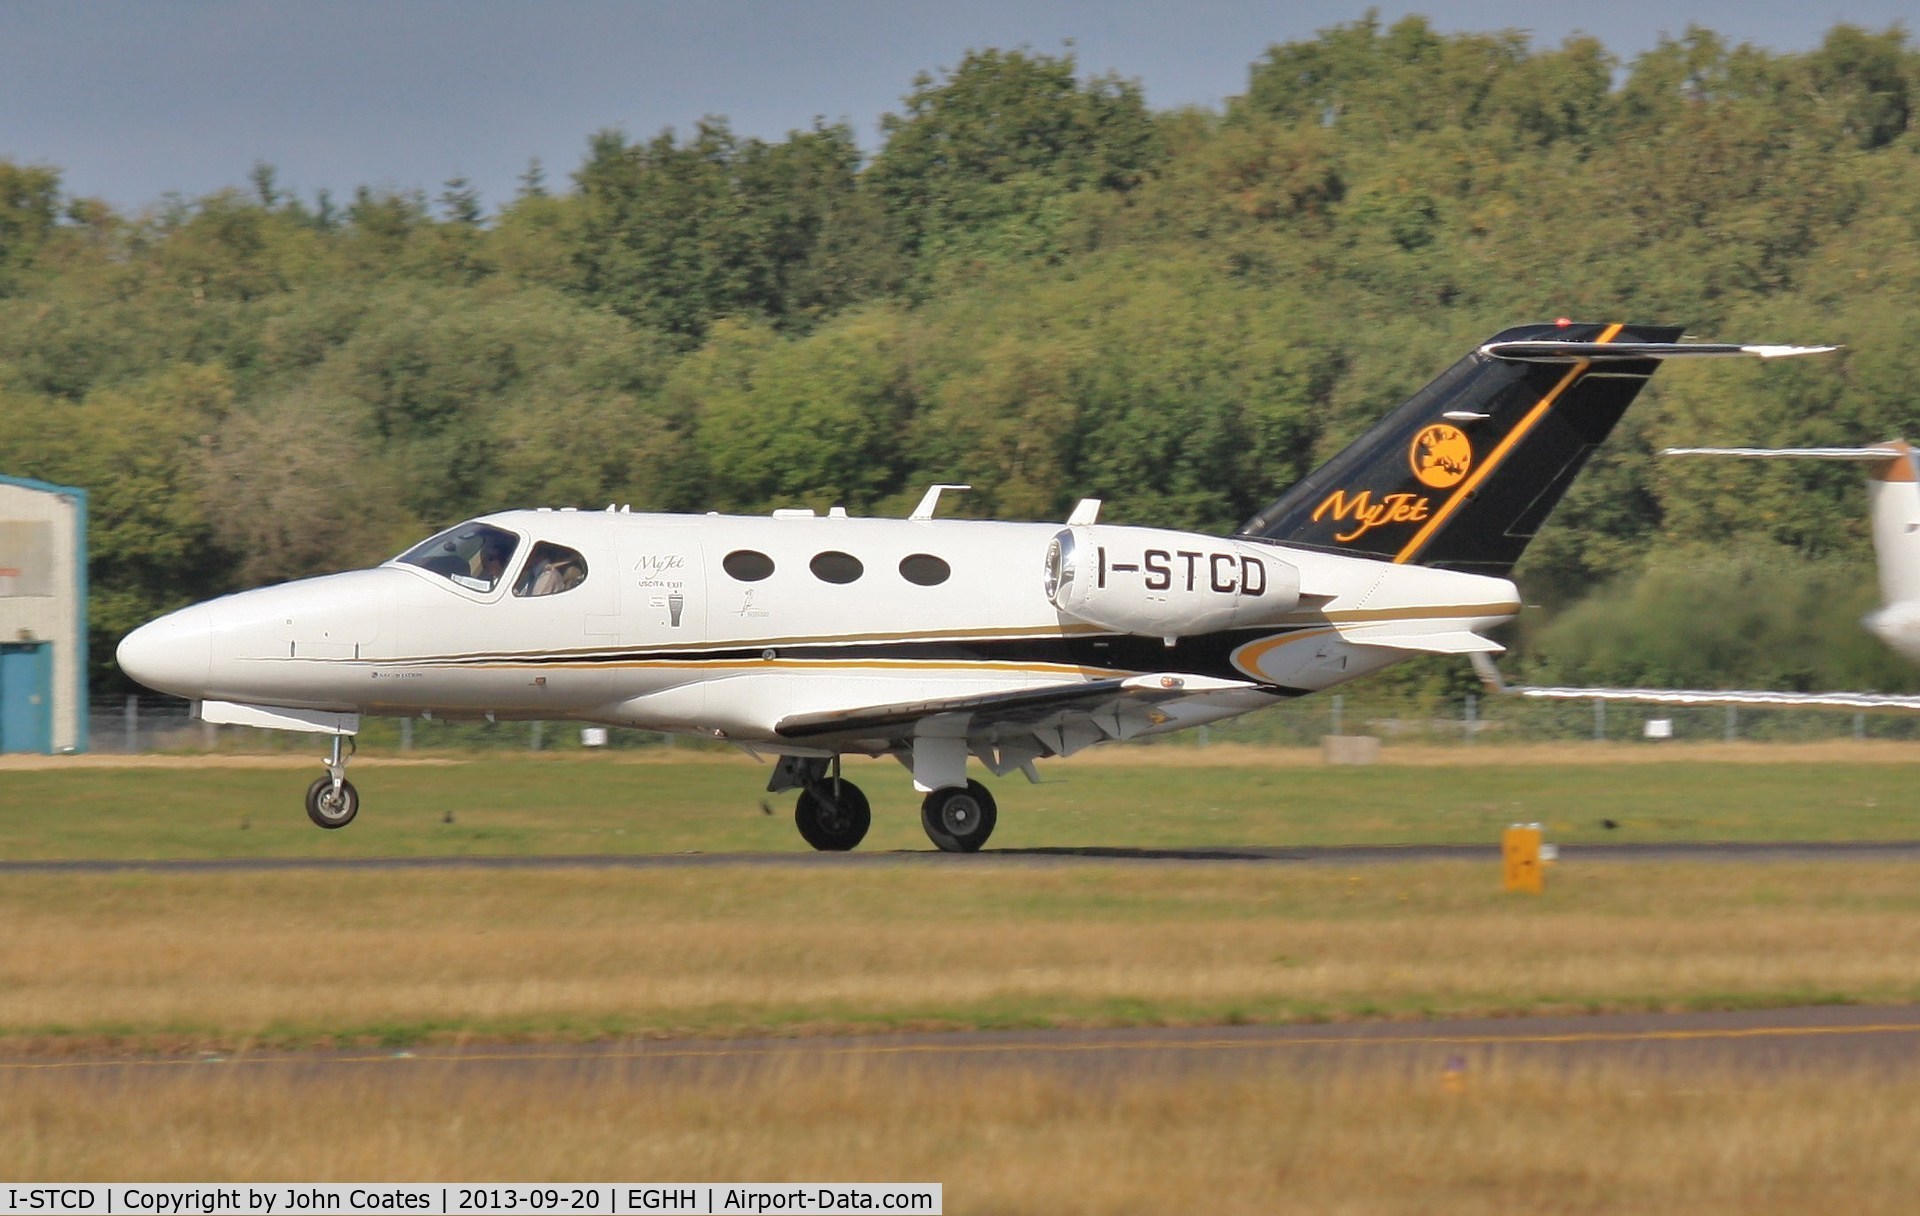 I-STCD, 2010 Cessna 510 Citation Mustang Citation Mustang C/N 510-0361, Touching down on airtest